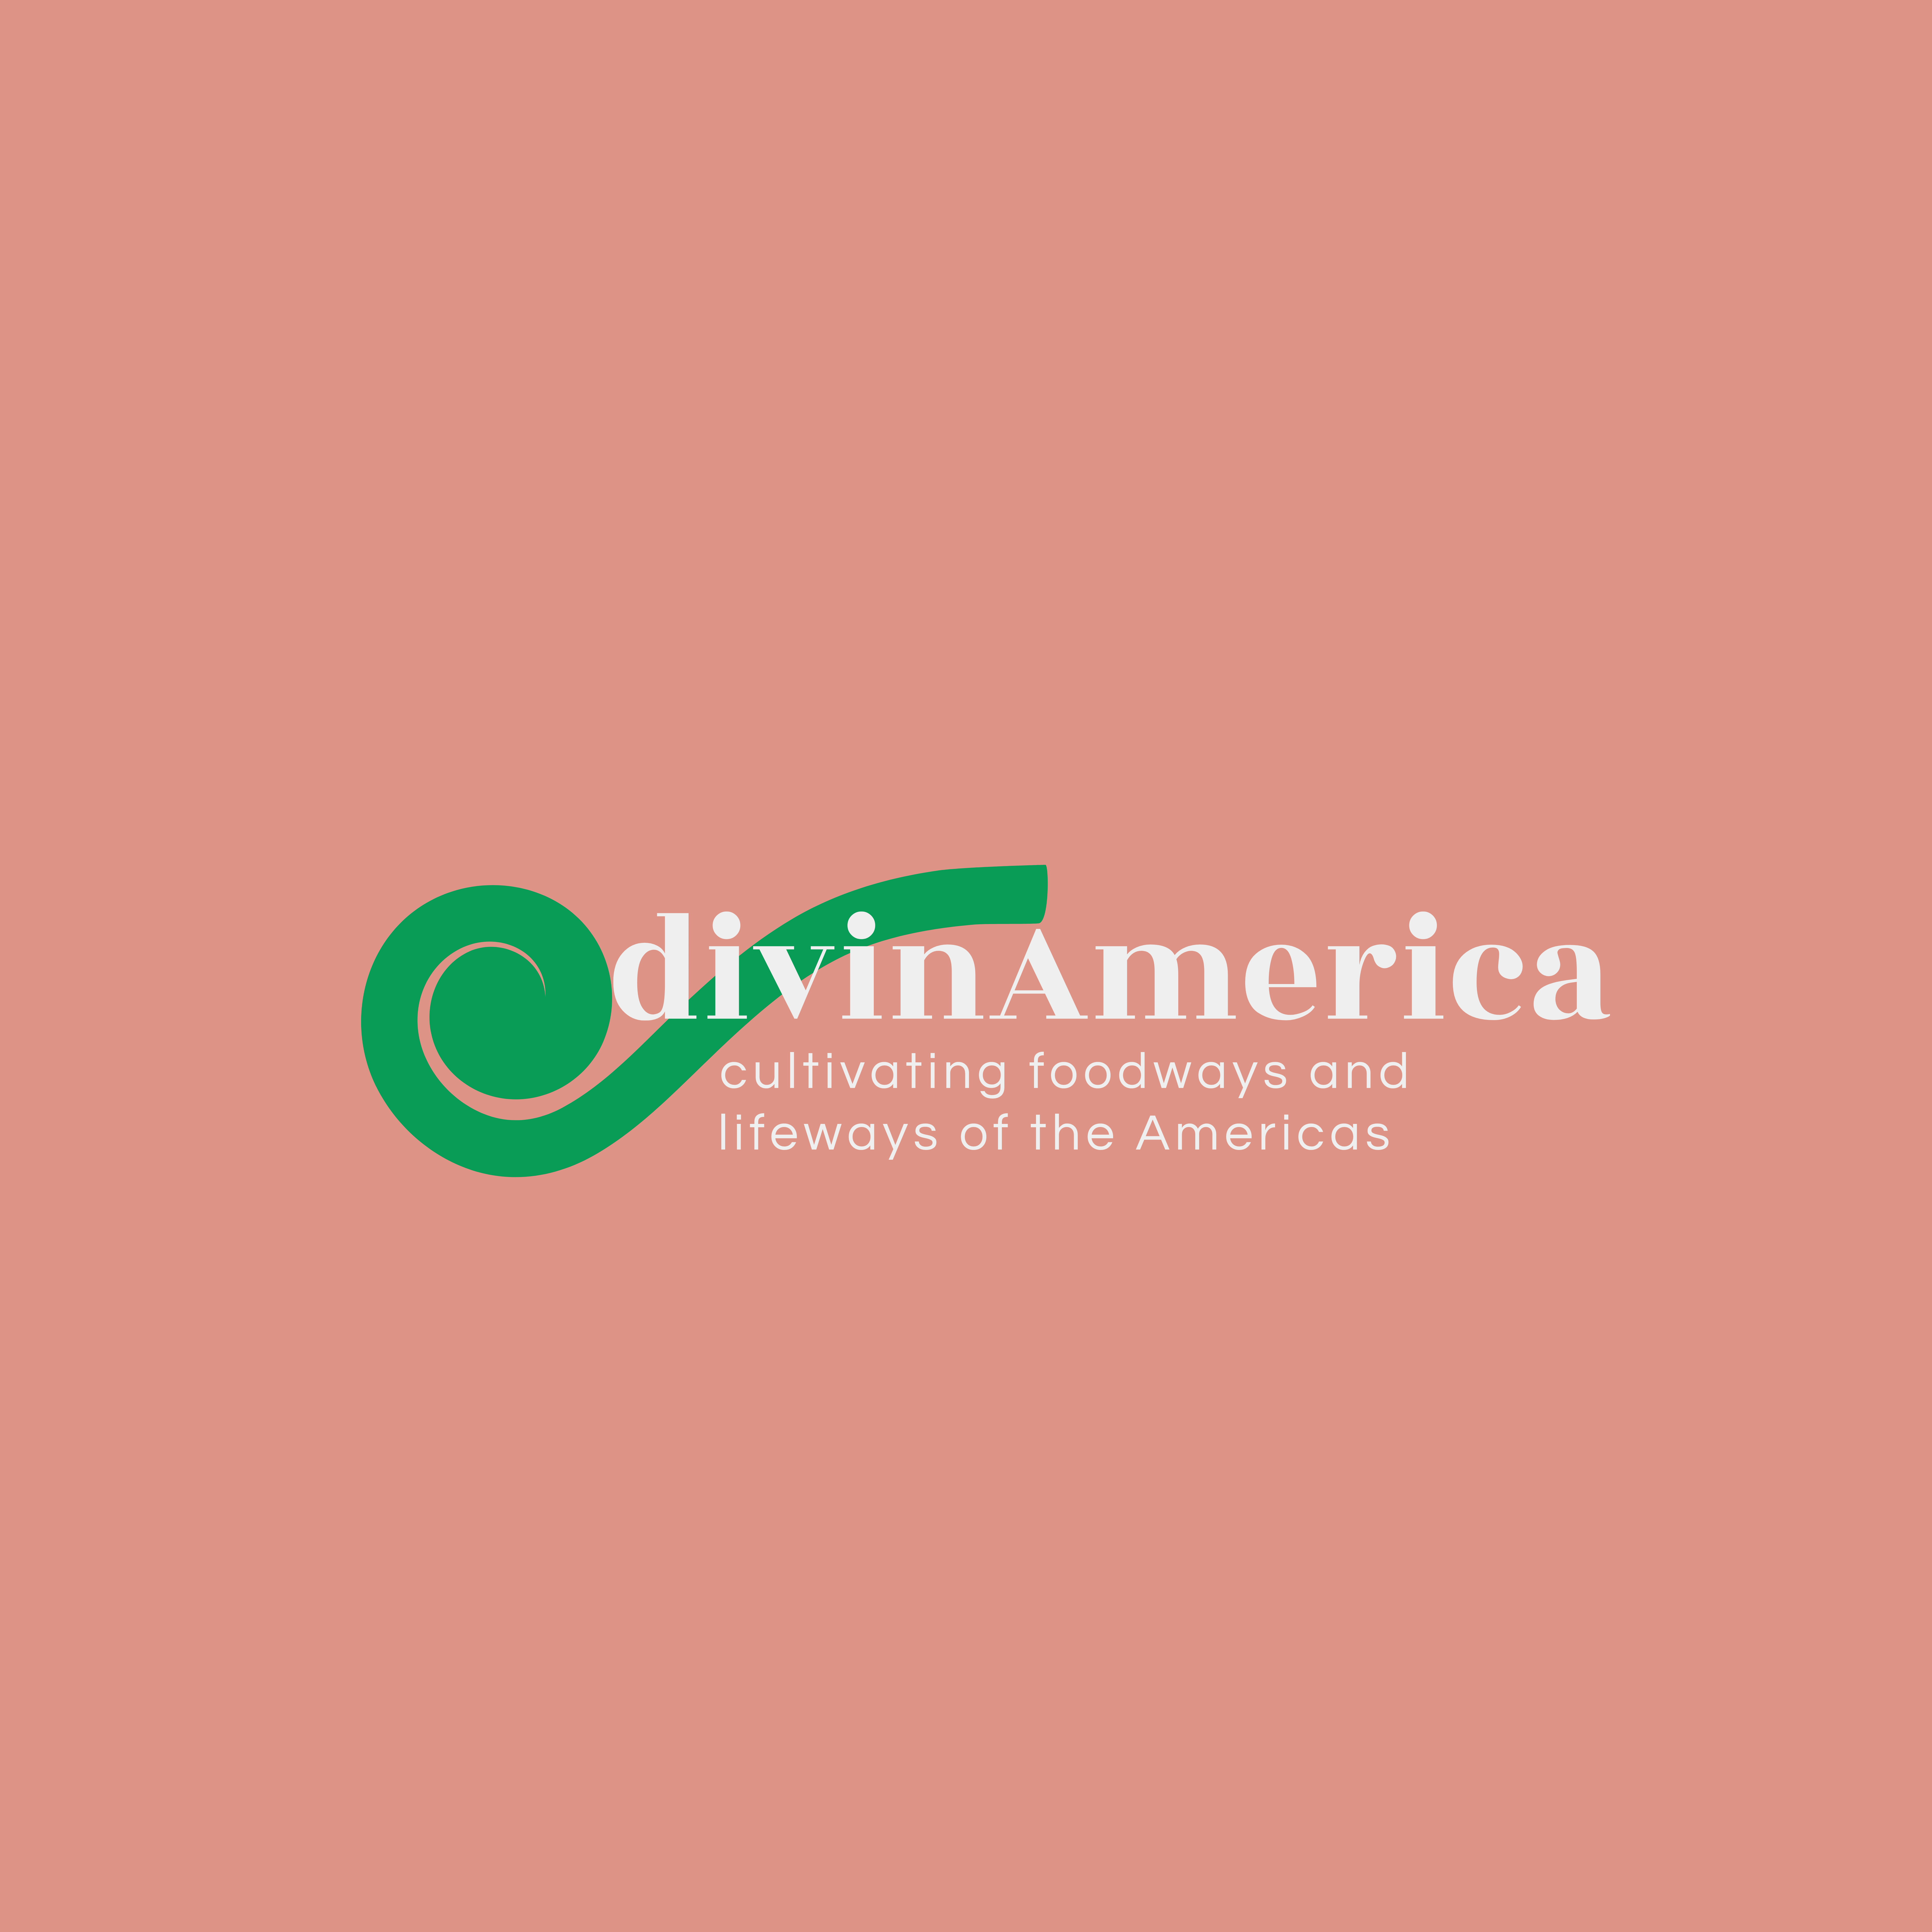 divinAmerica, llc
food and lifeways of the Americas
hospitality consulting
food innovaions
